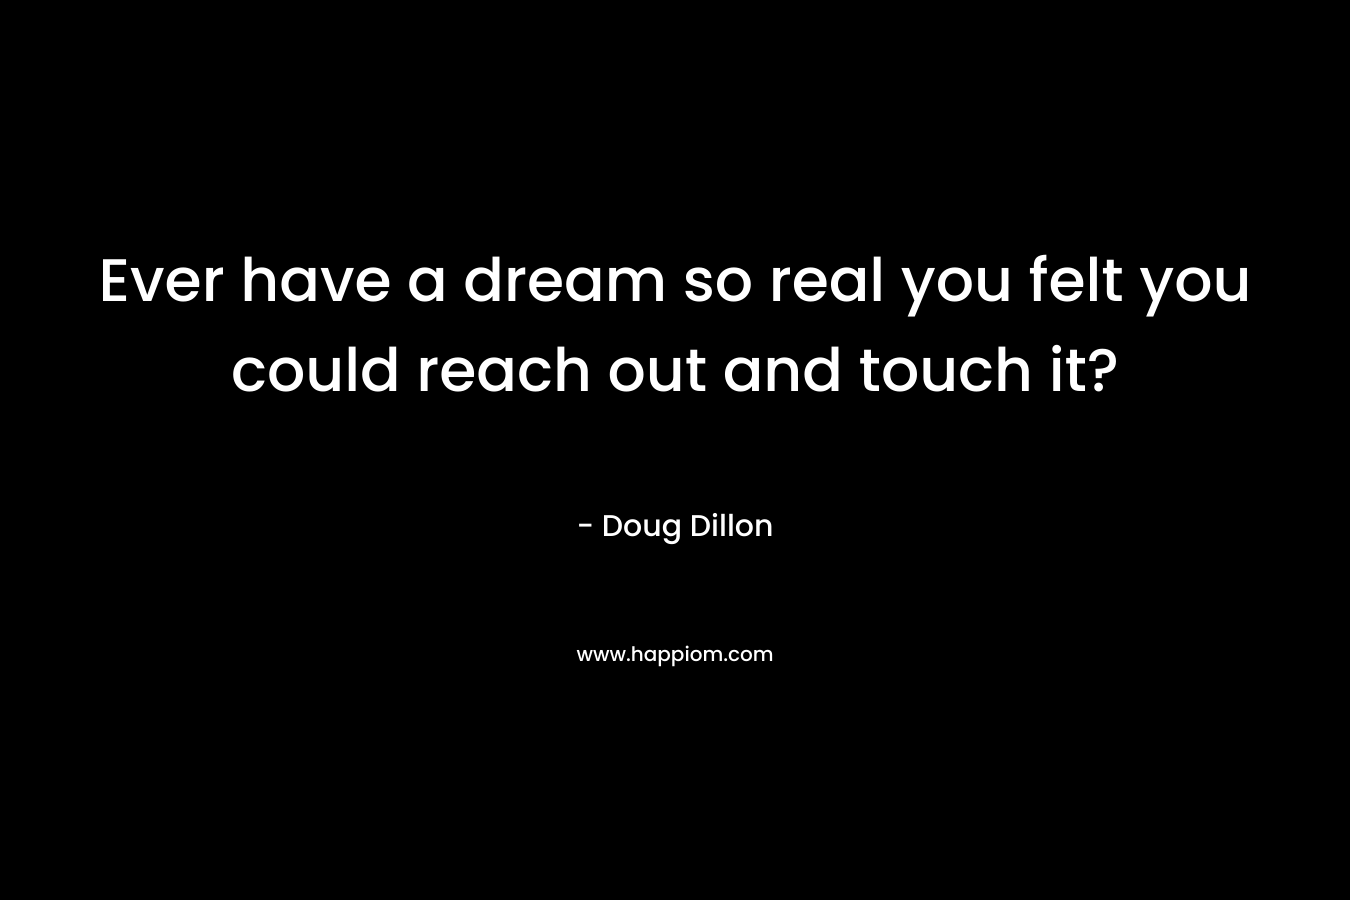 Ever have a dream so real you felt you could reach out and touch it? – Doug Dillon